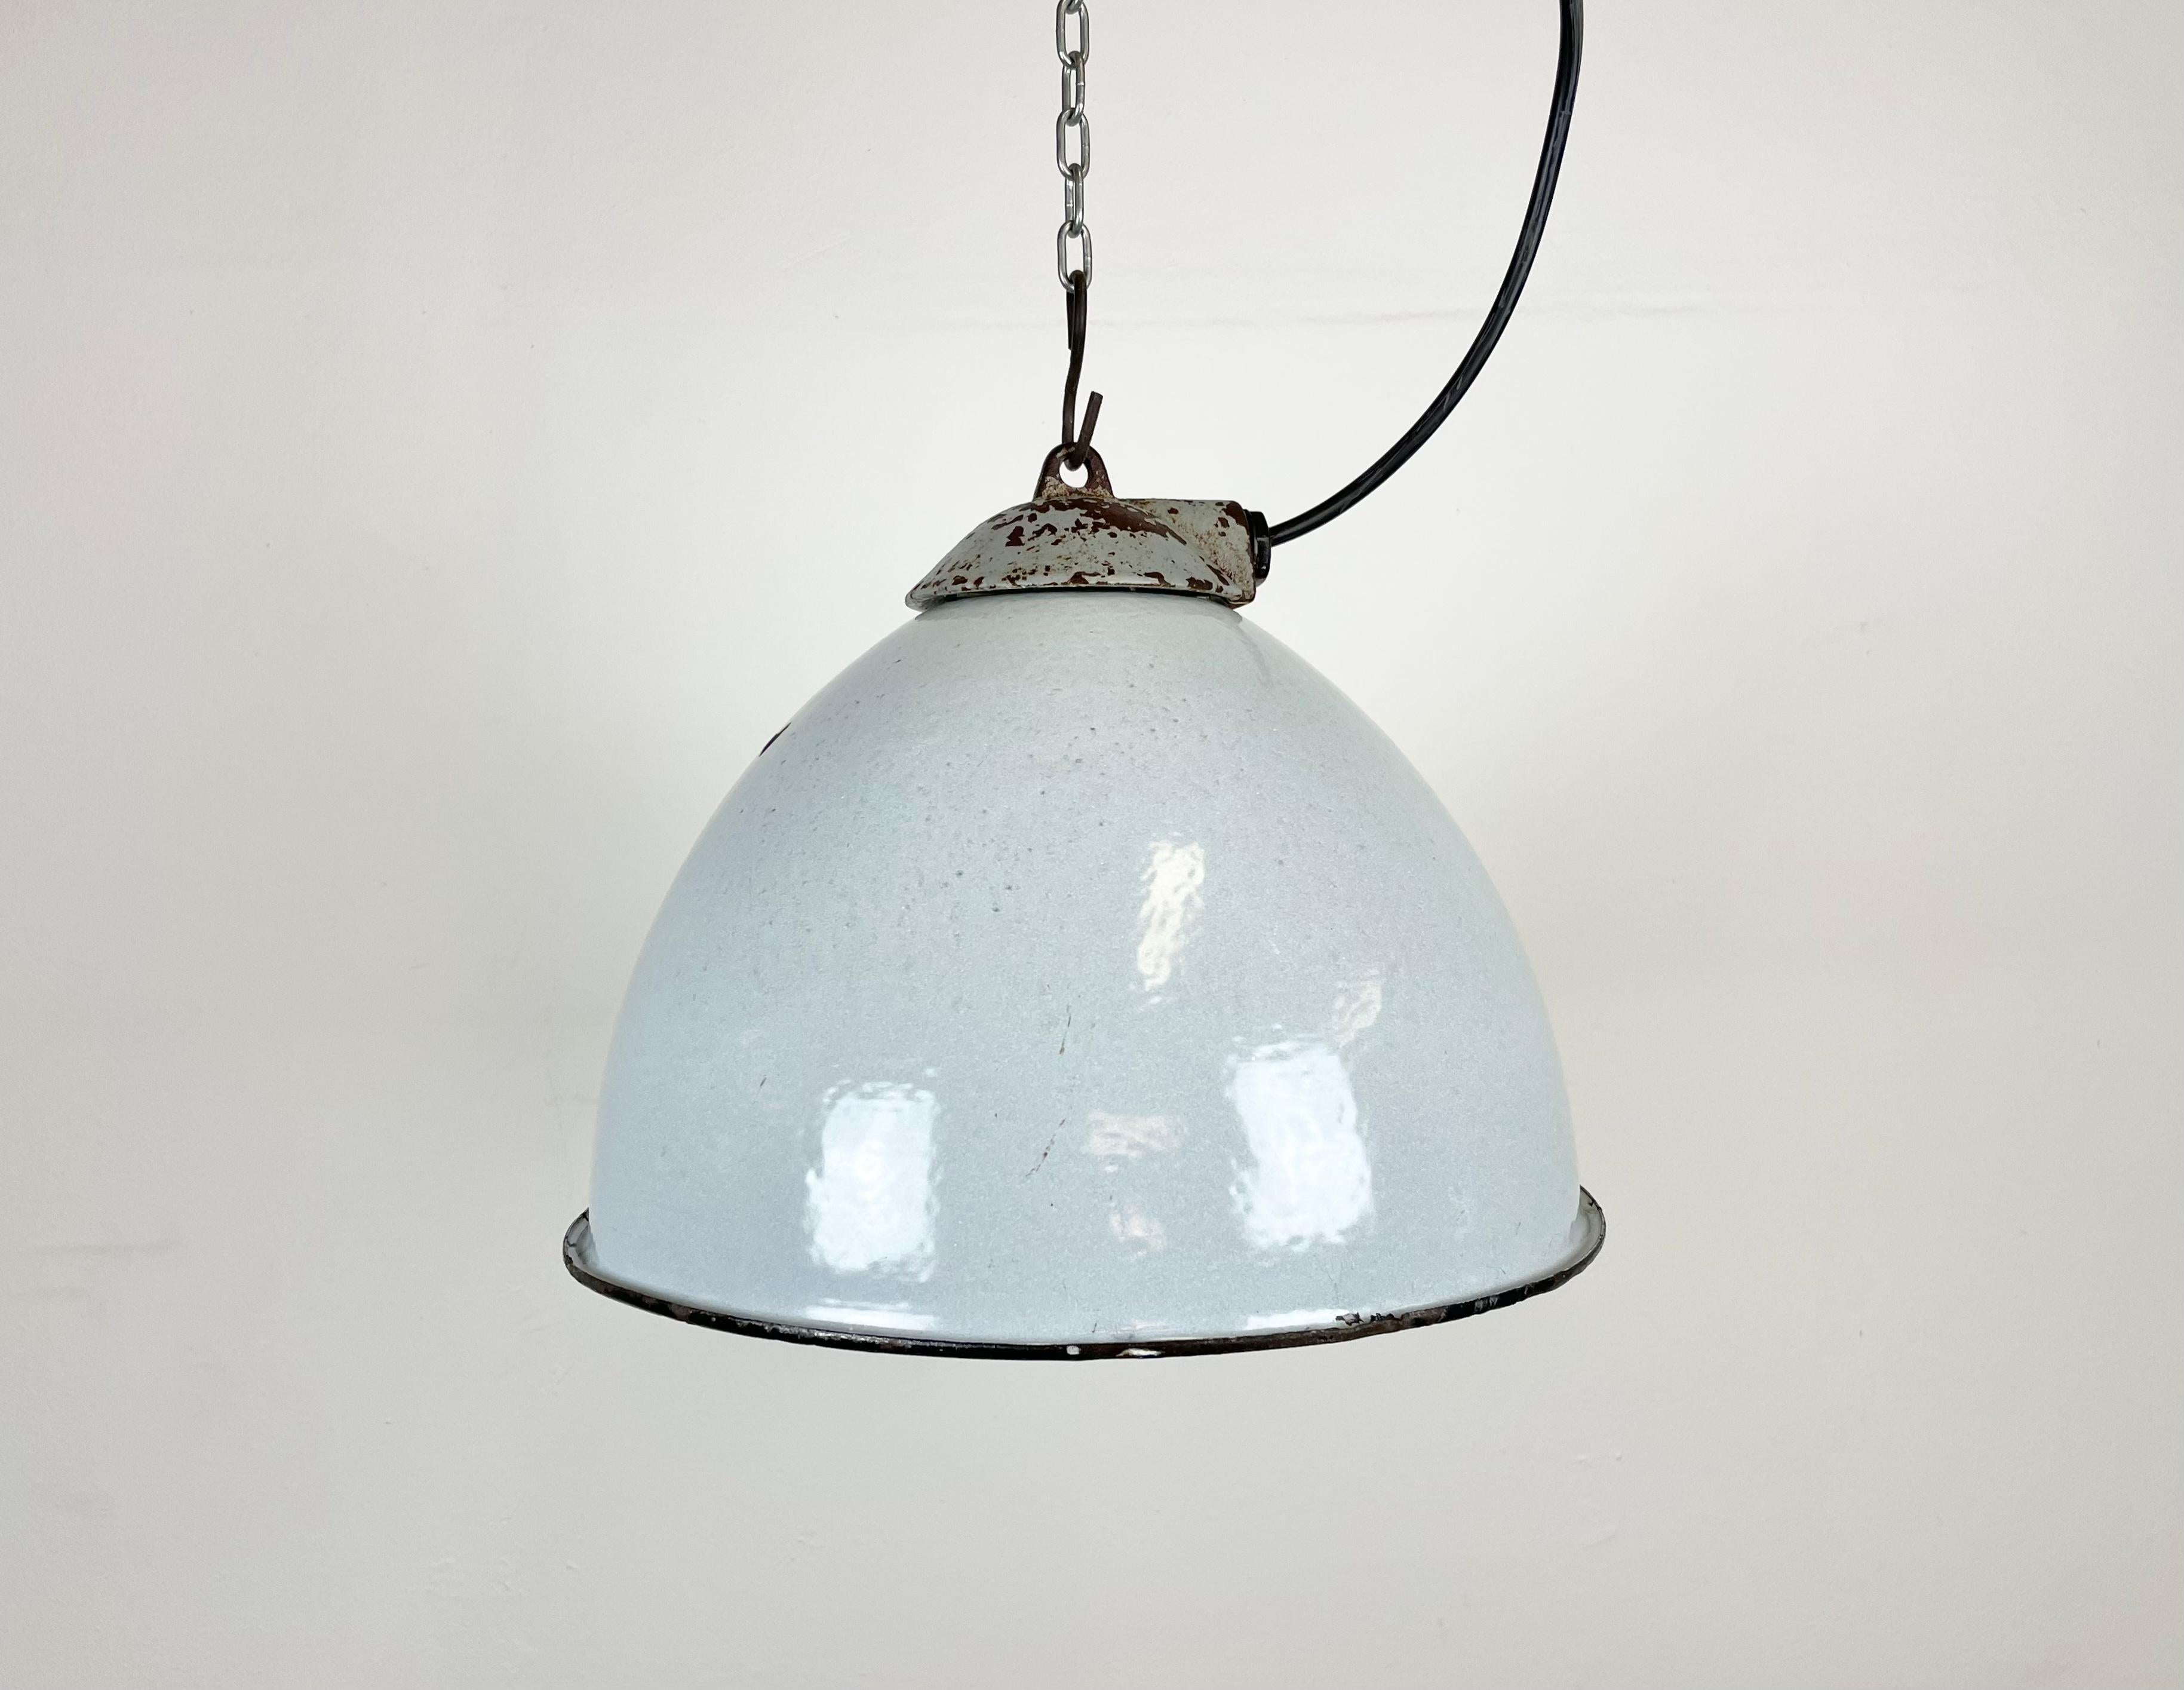 Industrial grey enamel pendant light made by Zaos in Poland during the 1960s. White enamel inside the shade. Cast iron top. The porcelain socket requires E 27 light bulbs. New wire. Fully functional. The weight of the lamp is 1,8 kg.